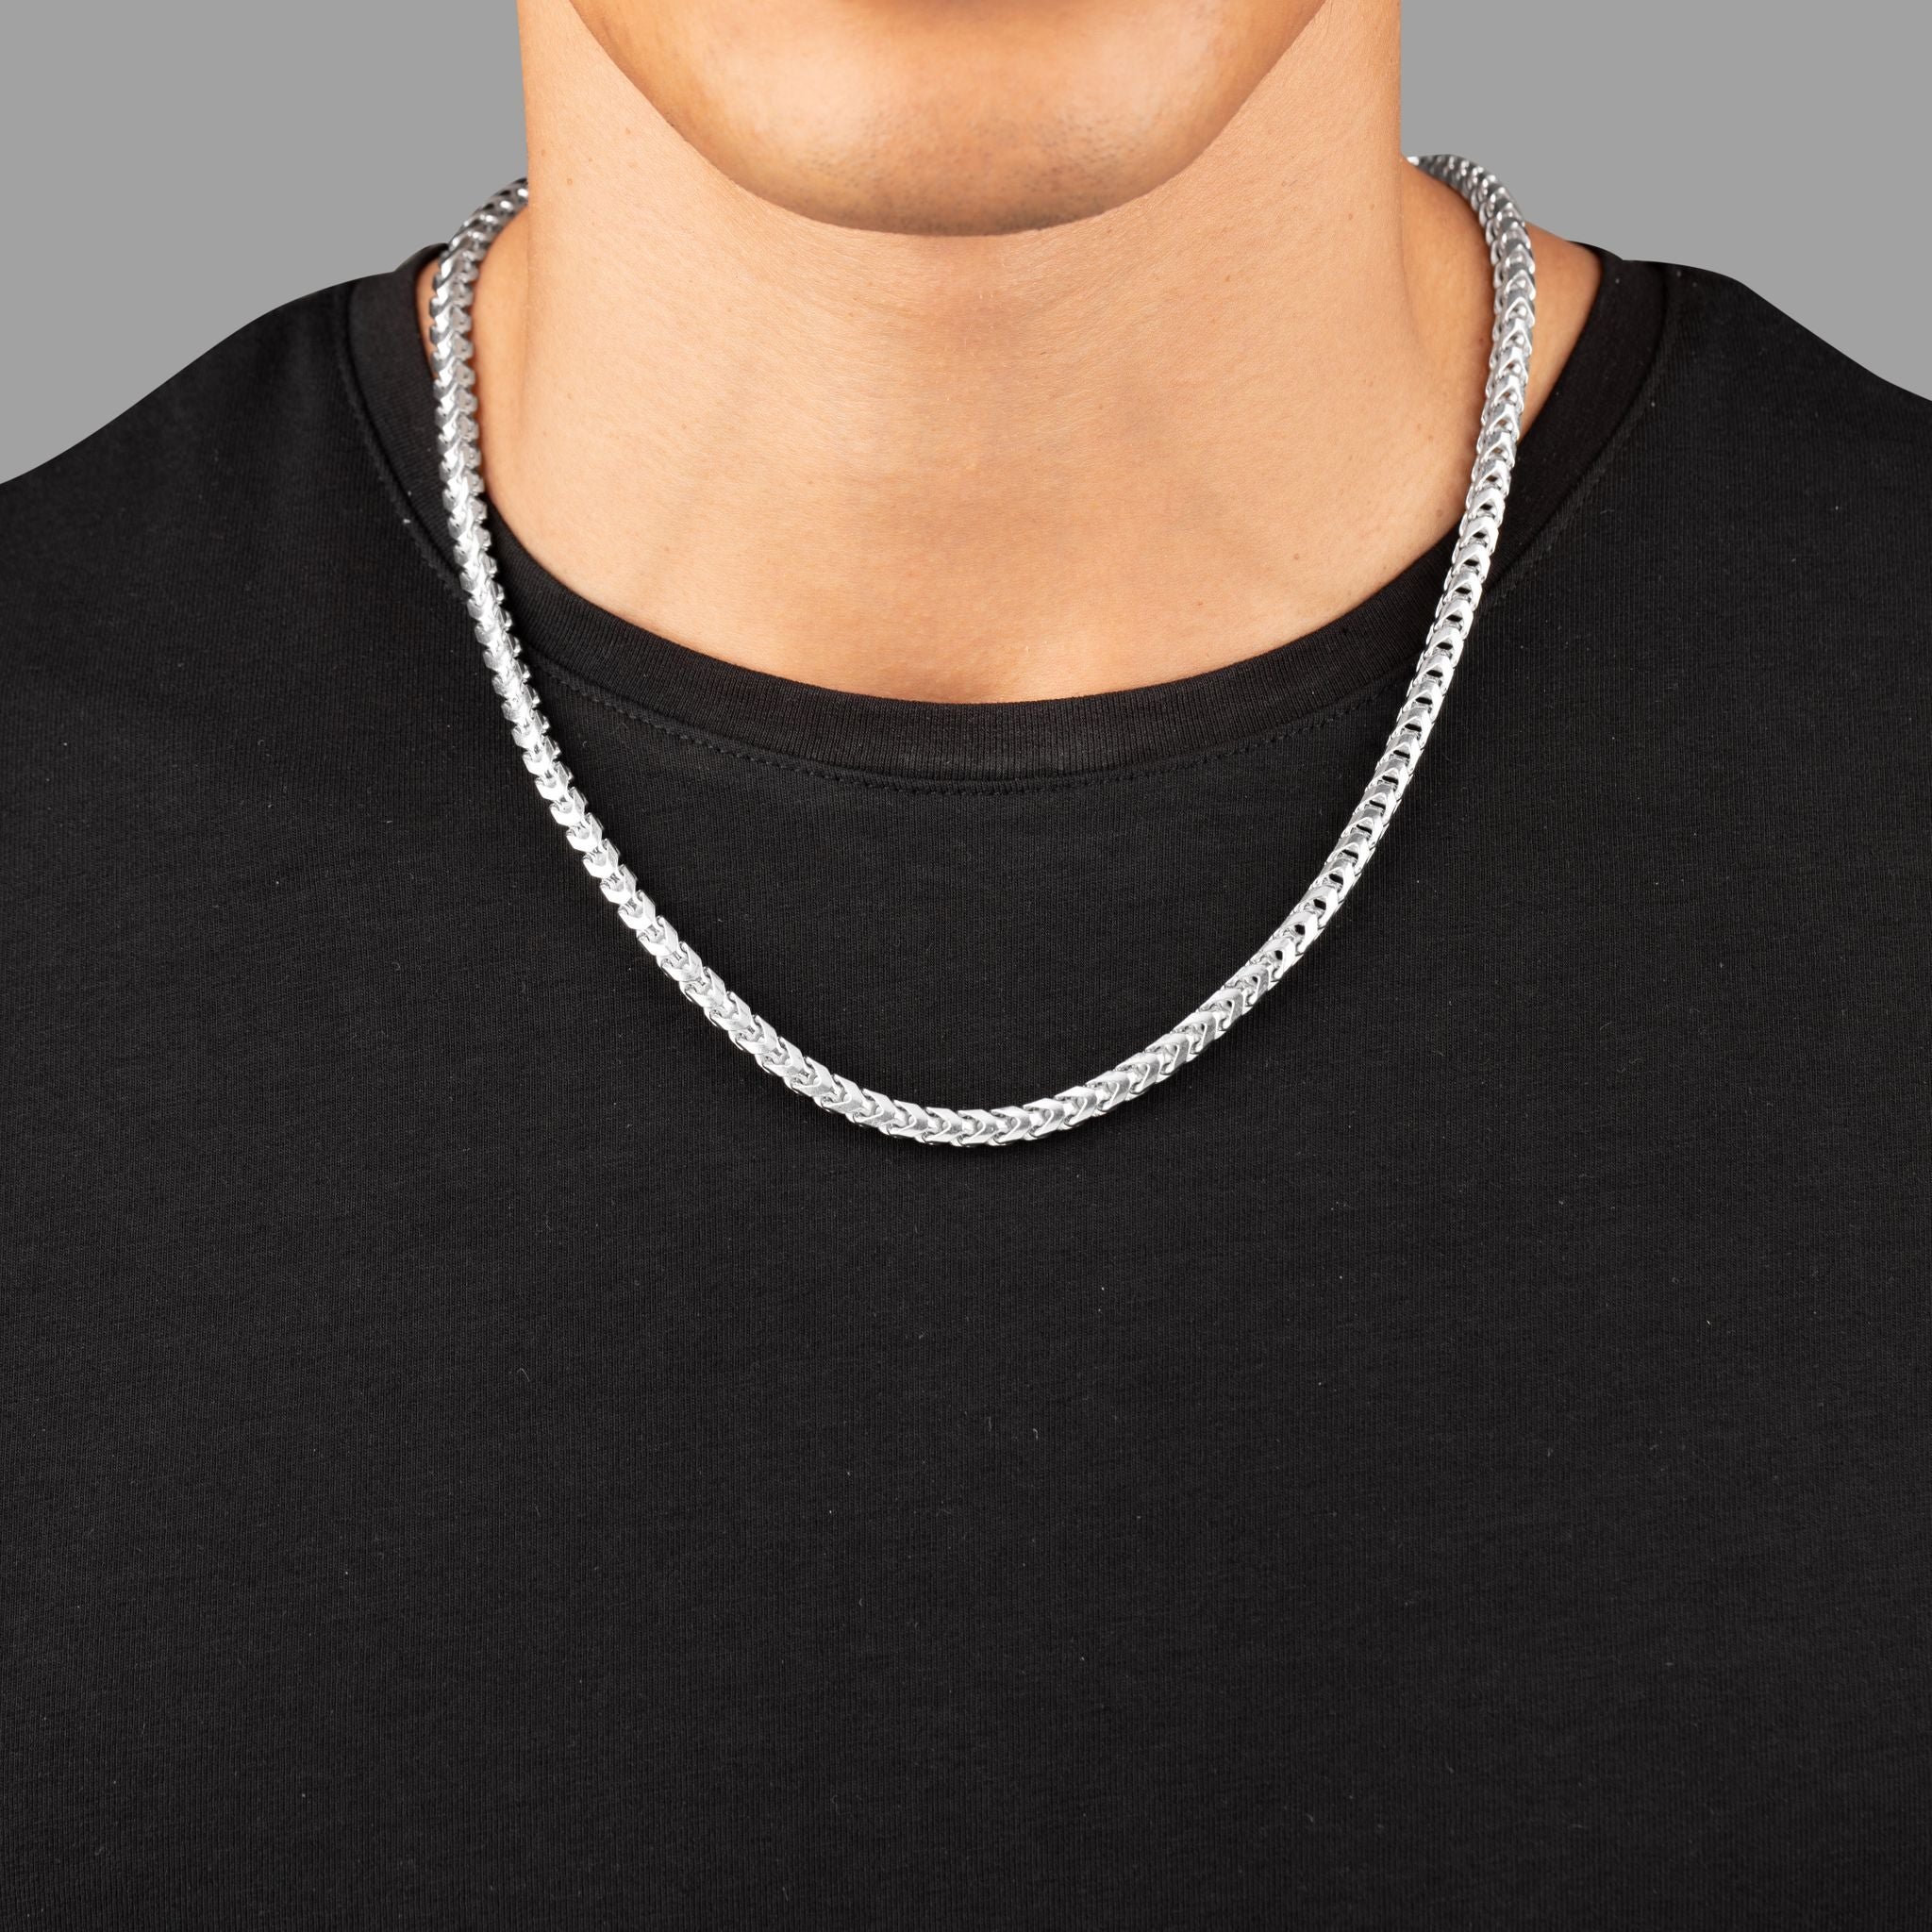 5mm Silver Franco Chain, Silver Chain for Men, Proclamation Jewelry 24 Inches